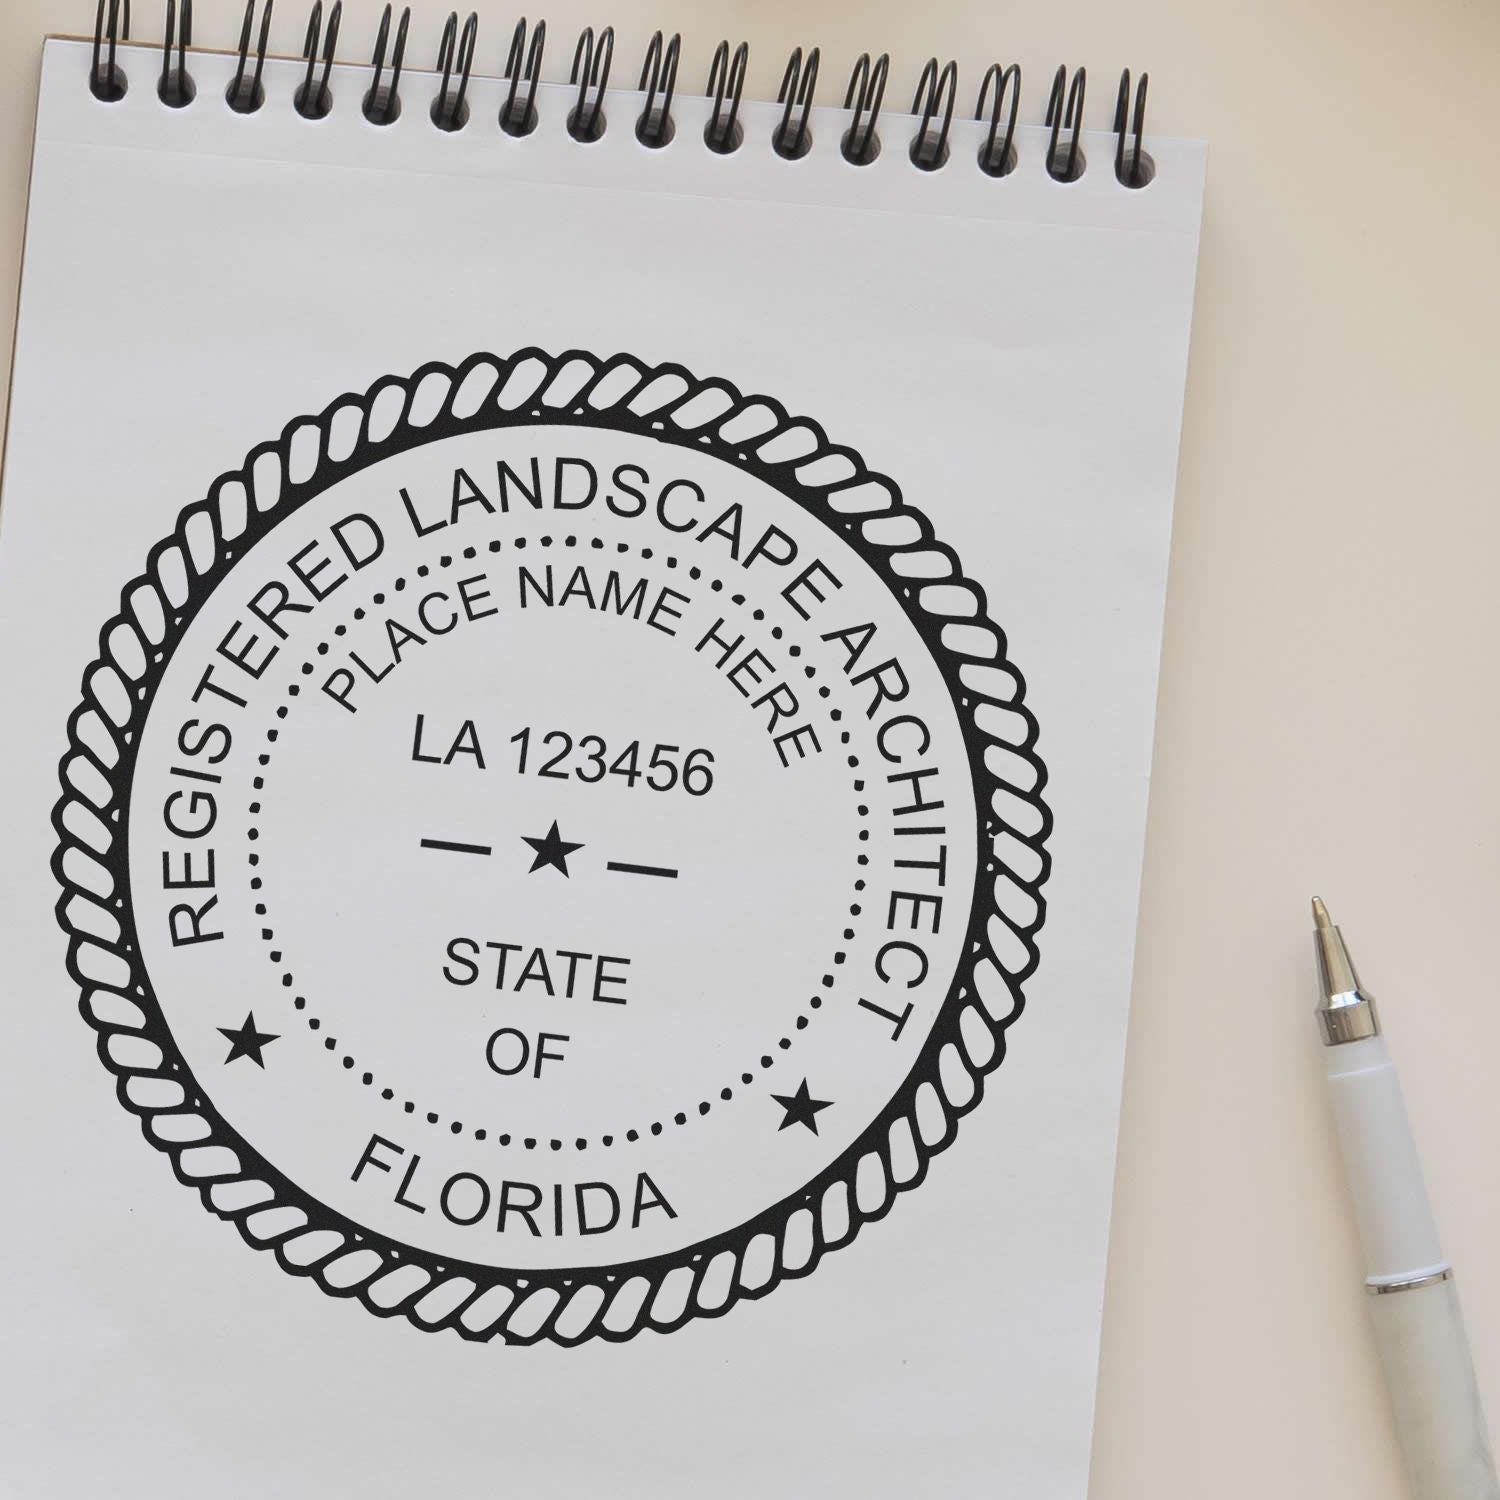 Premium MaxLight Pre-Inked Florida Landscape Architectural Stamp in use photo showing a stamped imprint of the Premium MaxLight Pre-Inked Florida Landscape Architectural Stamp